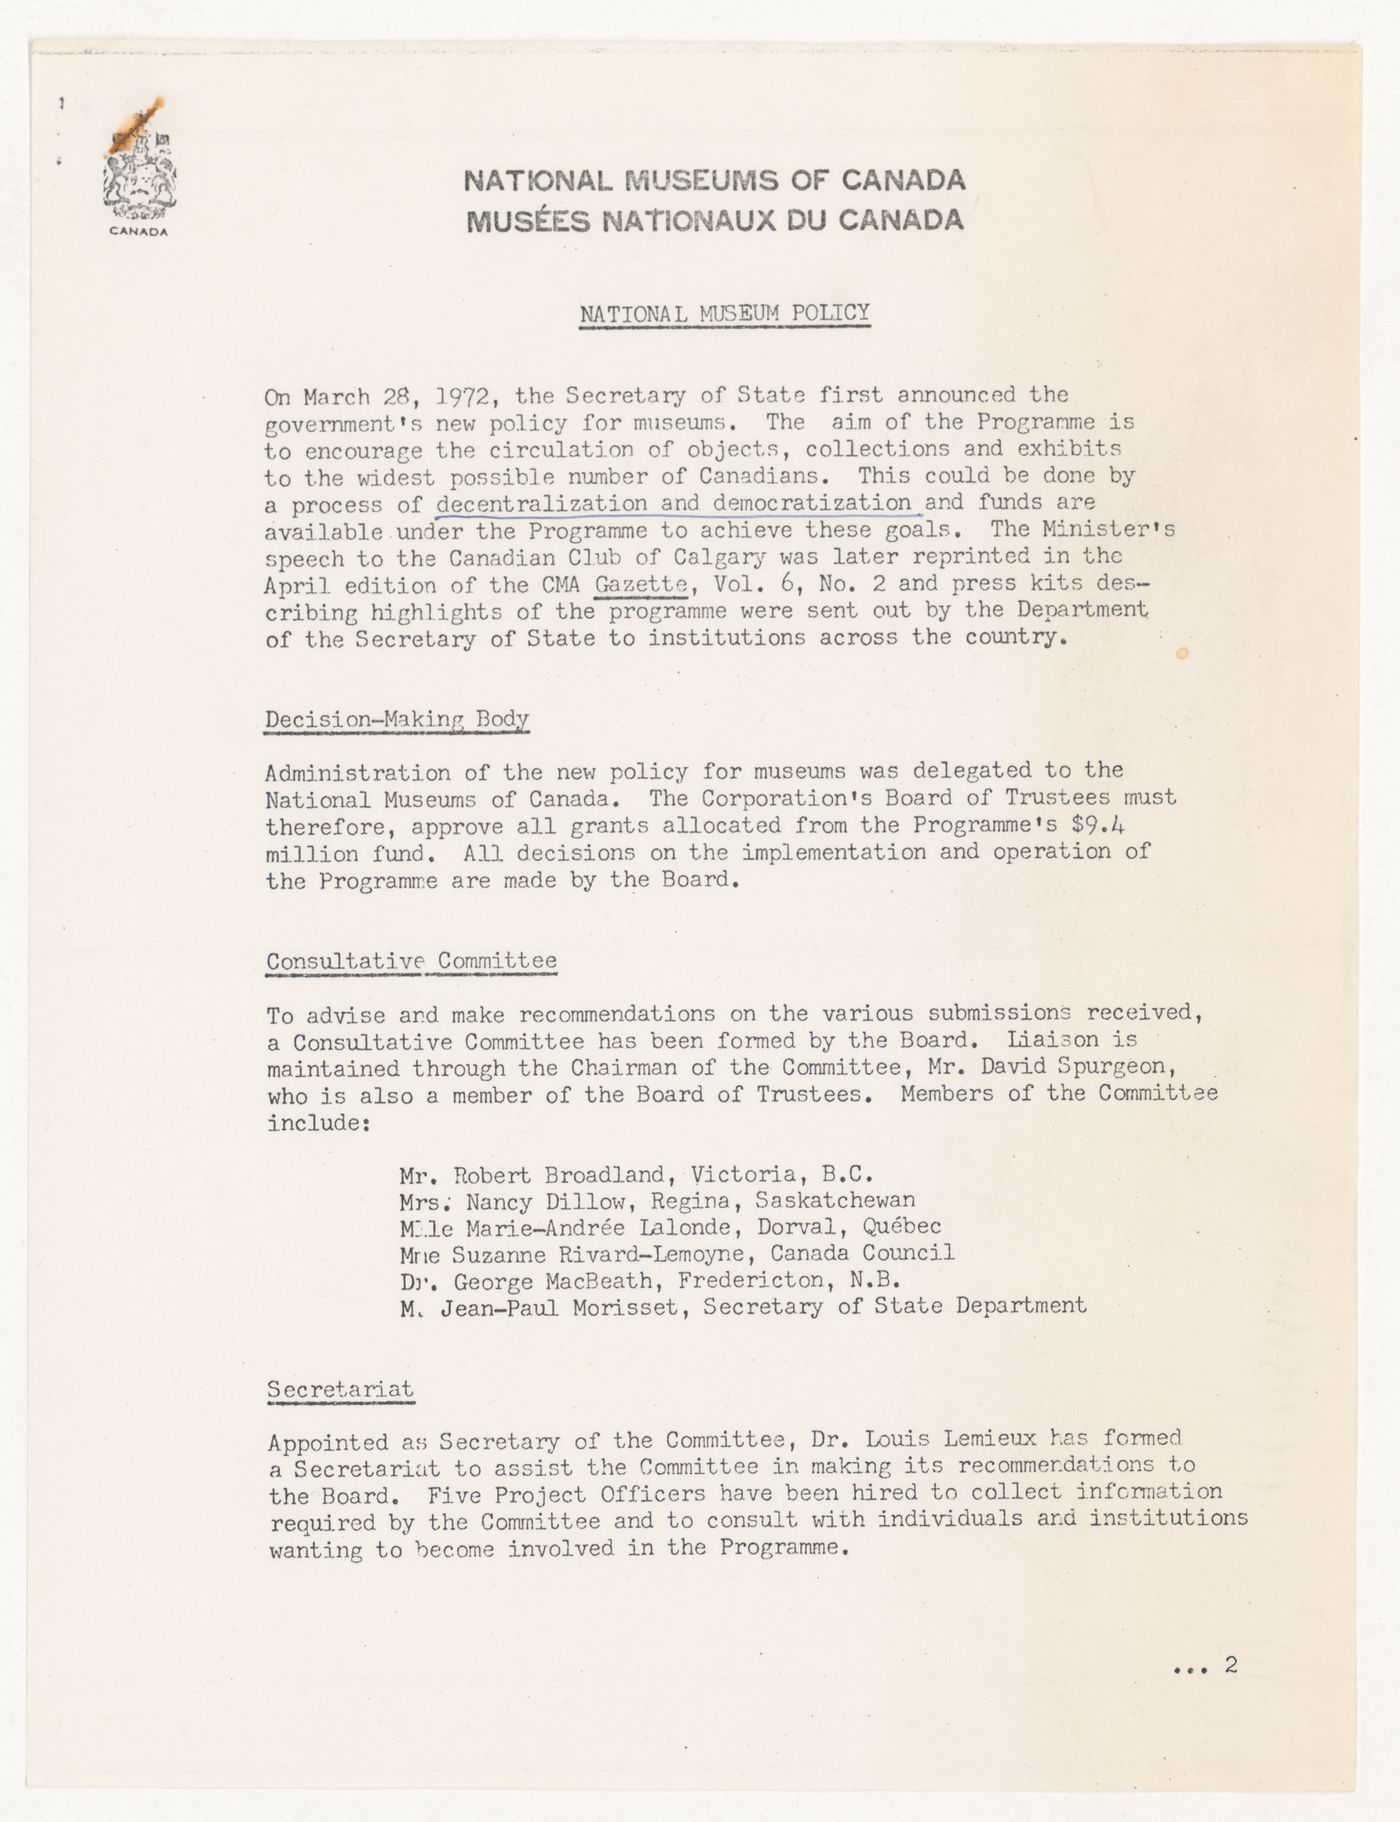 Policy statement by National Museums of Canada (from the project file Universal Modular Museum)